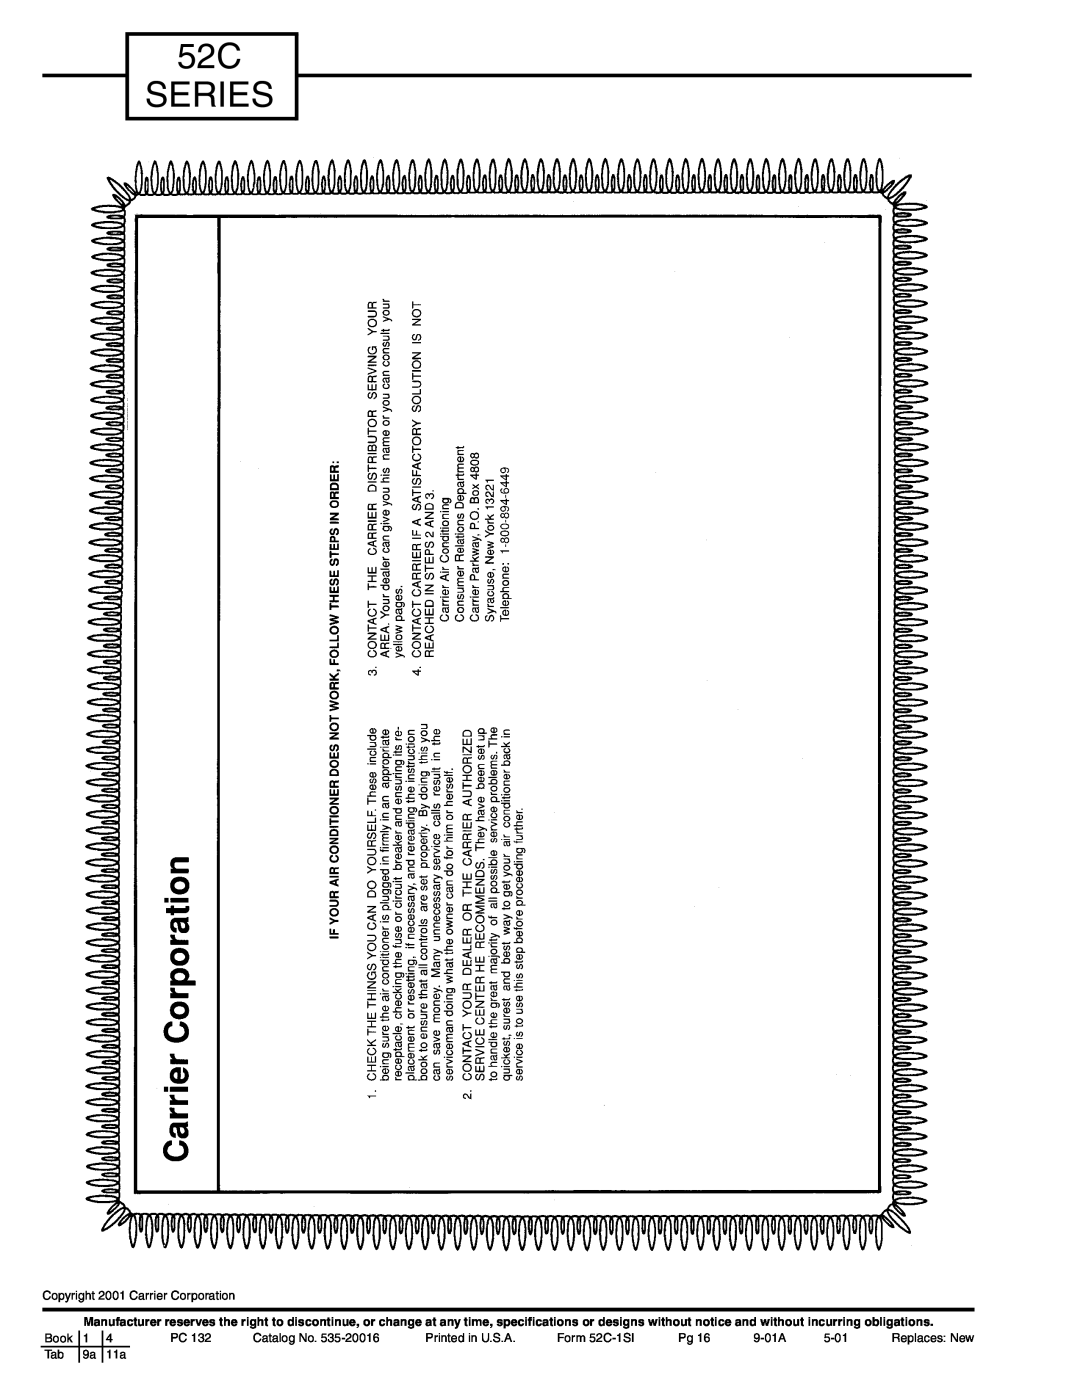 Carrier Access owner manual 52C SERIES, Copyright 2001 Carrier Corporation 